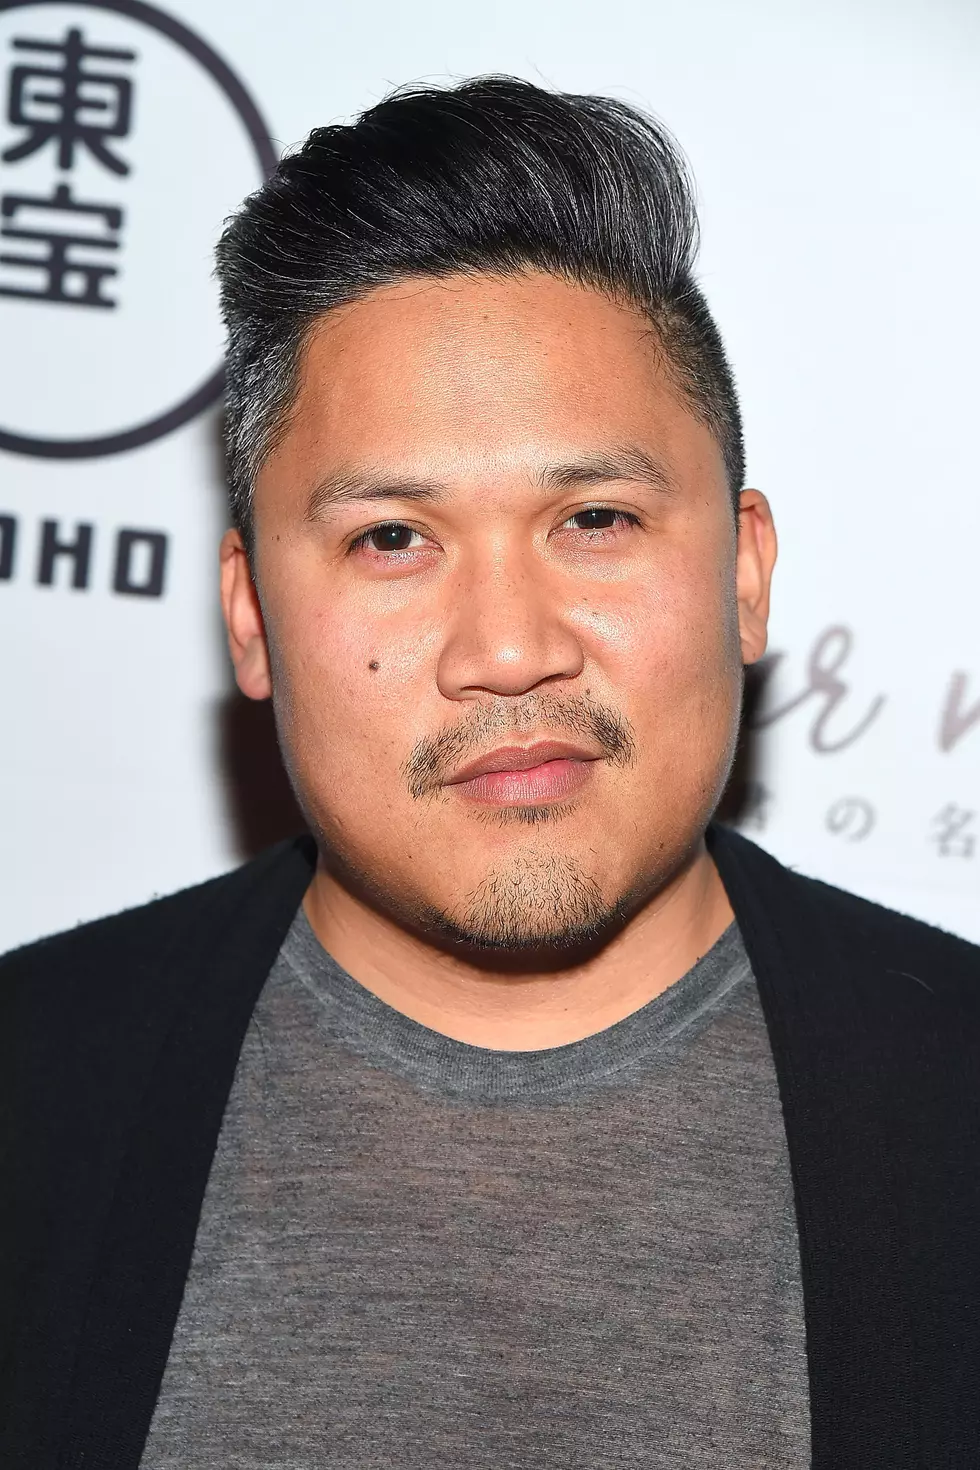 Wanna Feel Old? Rufio from ‘Hook’ is 42 Years Old